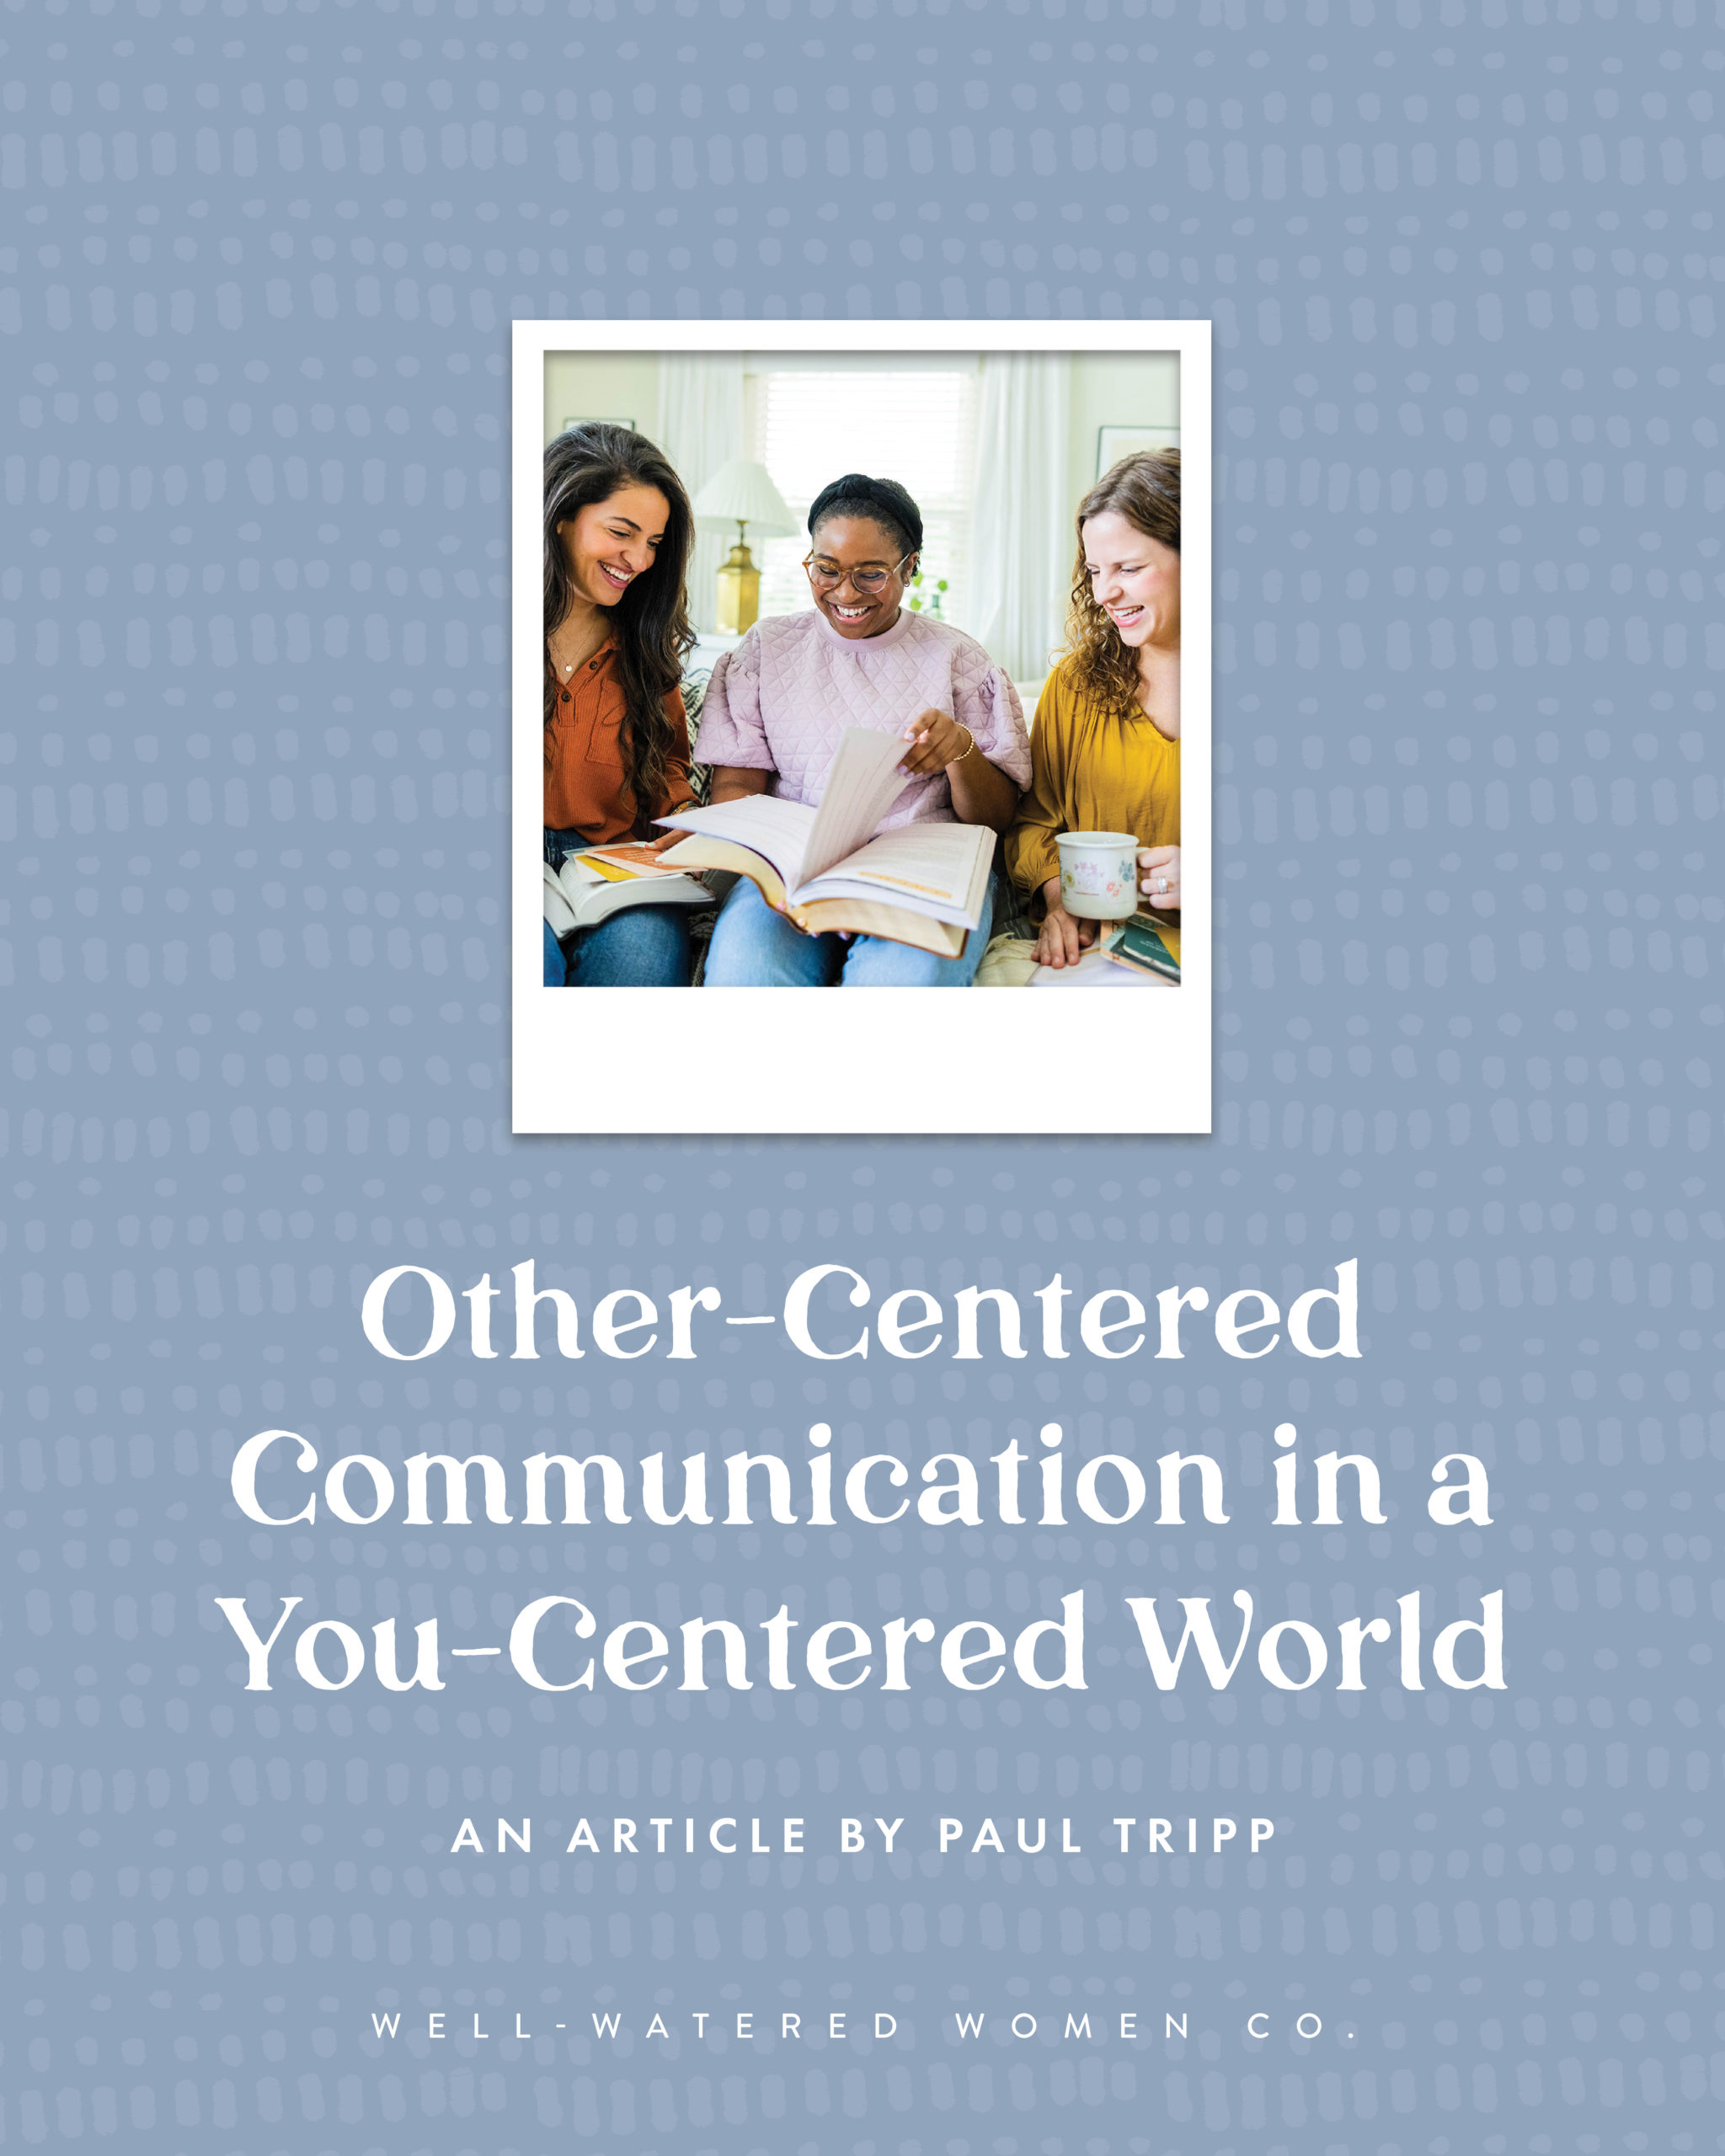 Other-Centered Communication in a You-Centered World - an article by Well-Watered Women